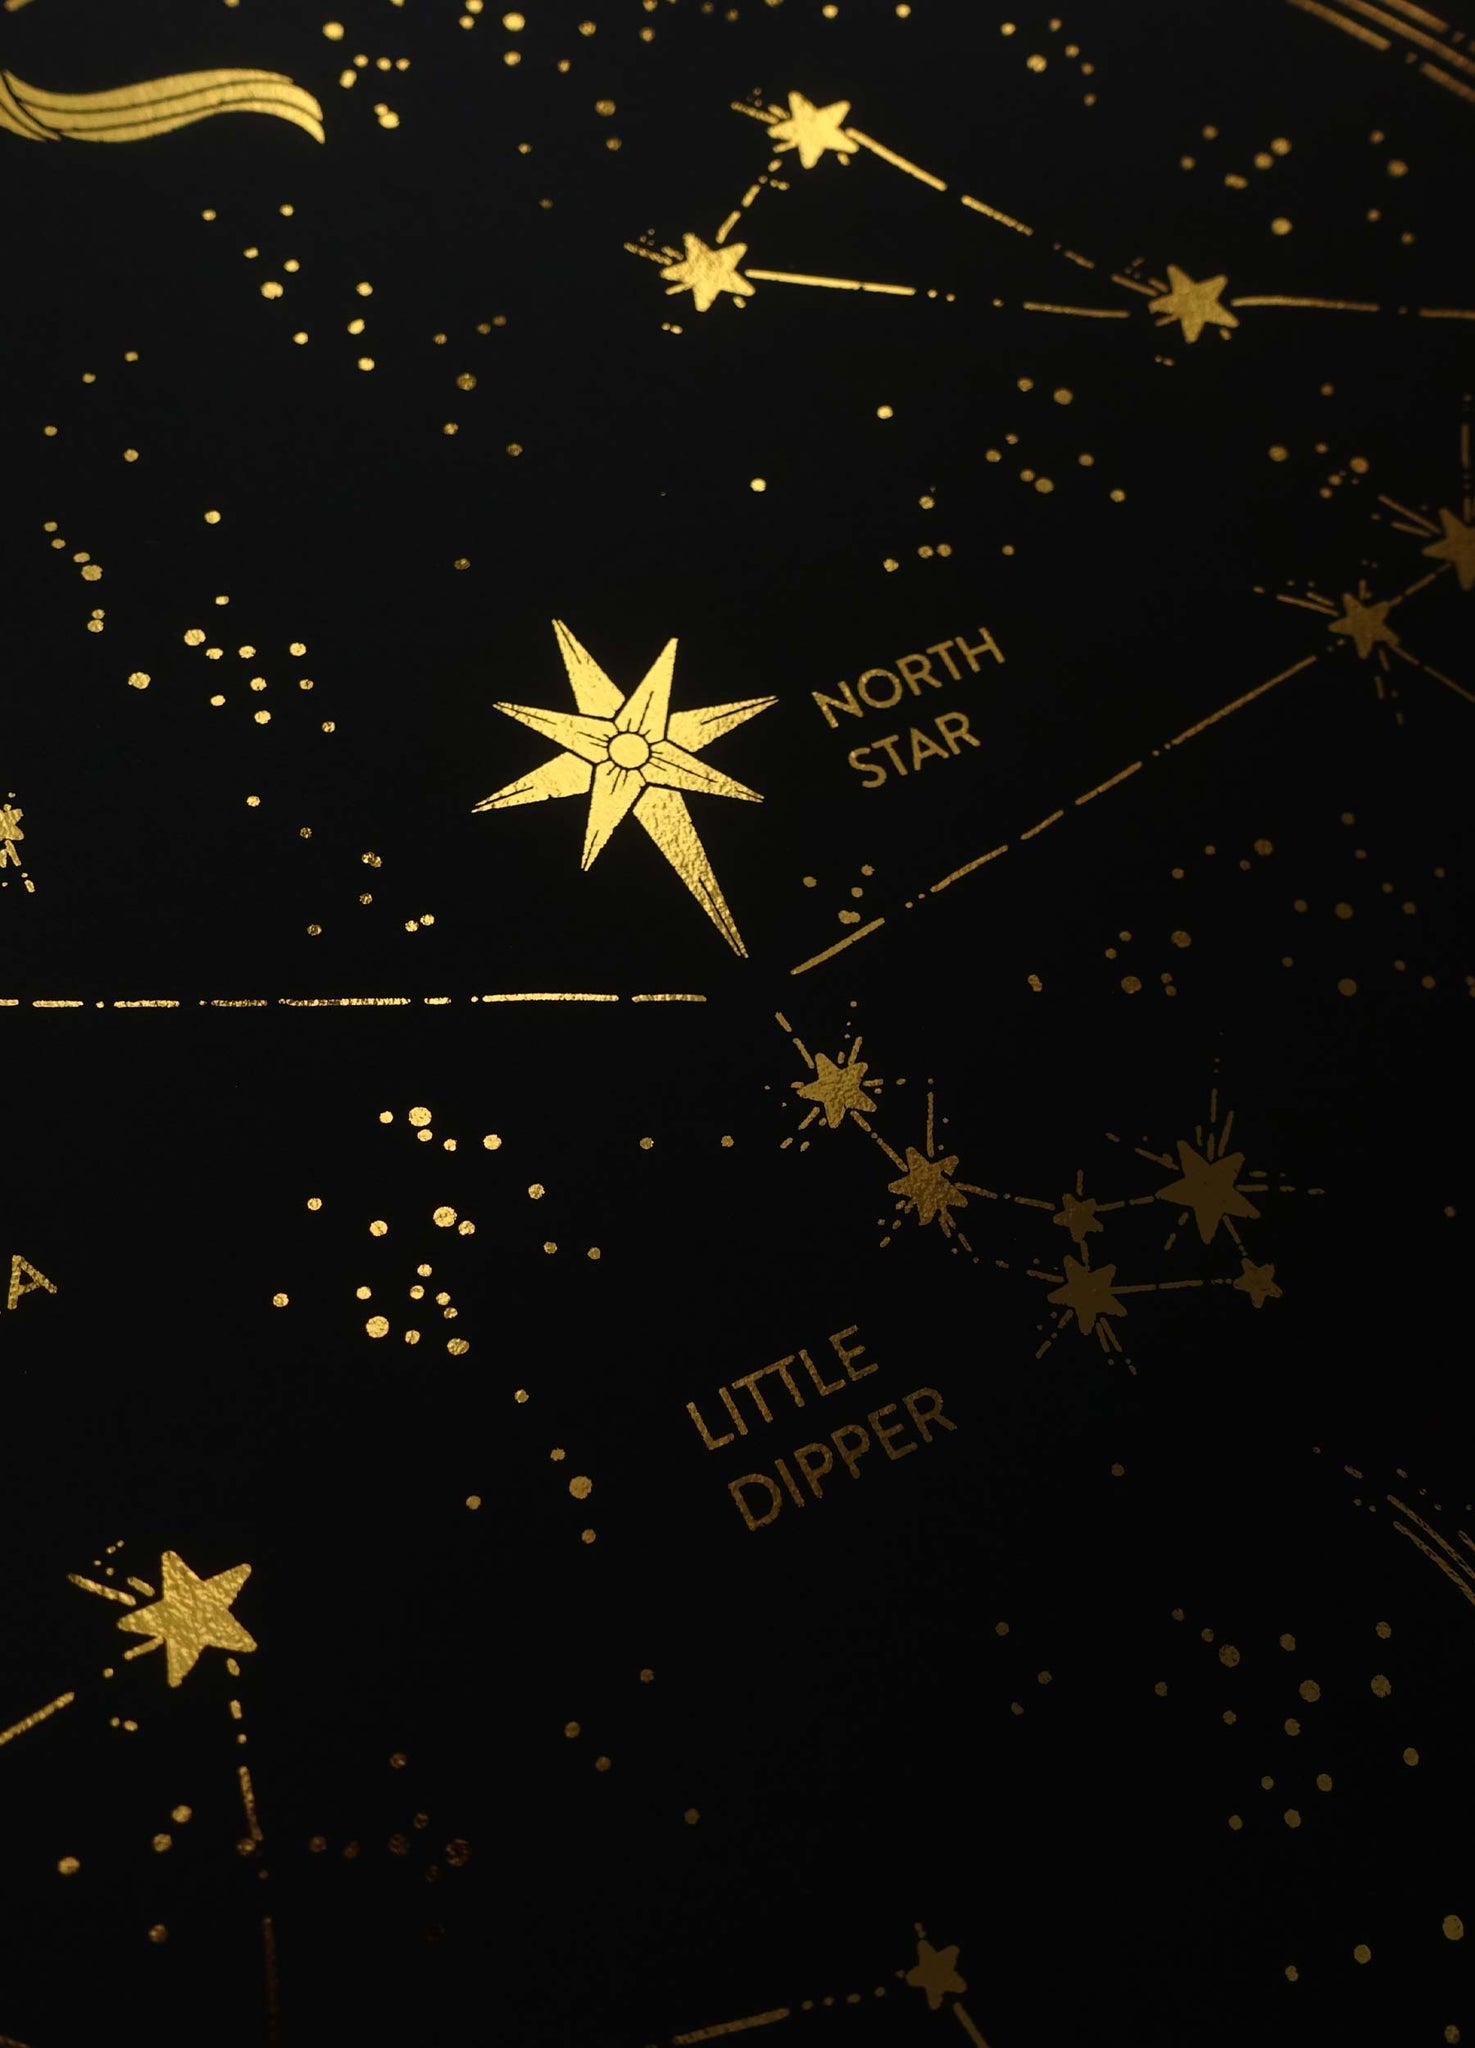 The North Star sky map gold foil art print on black paper by Cocorrina & Co